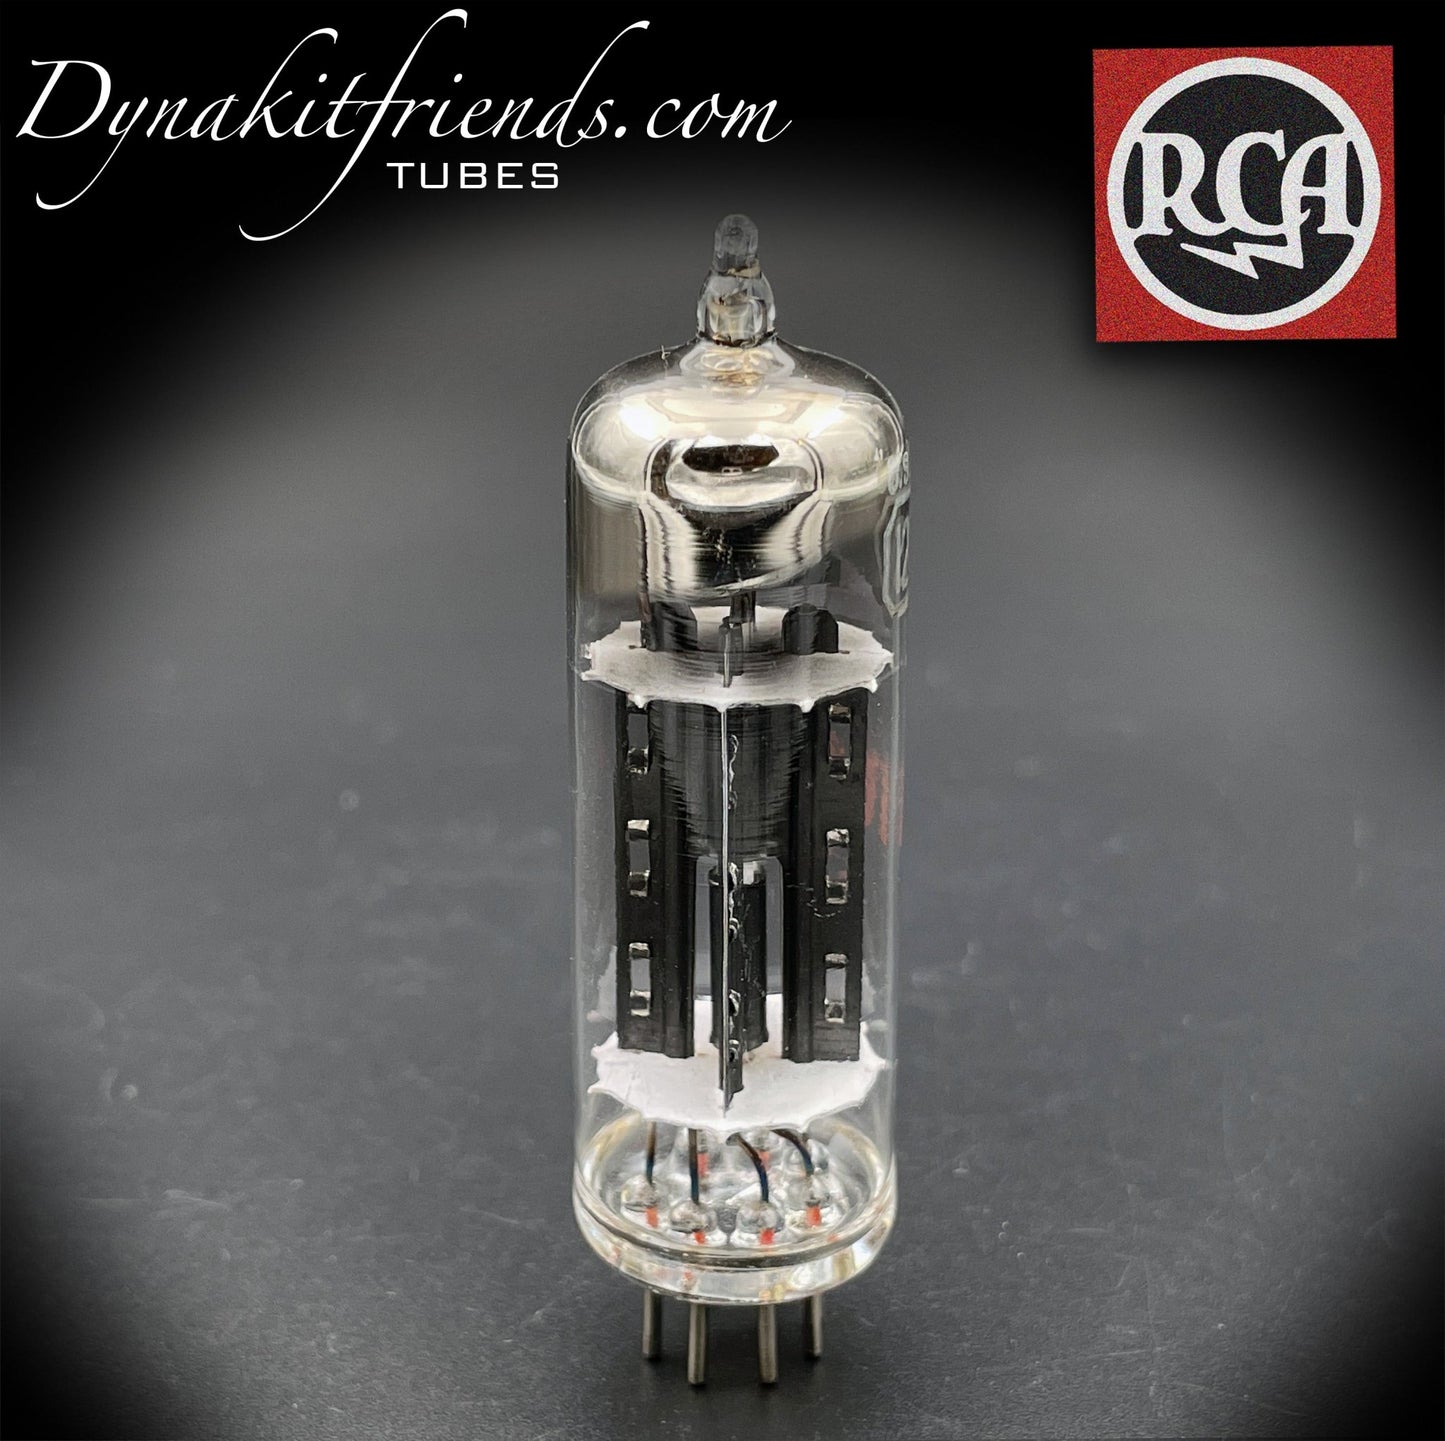 12X4 RCA Black Plates O Getter Tube Rectifier Made in USA - Vacuum Tubes Treasures